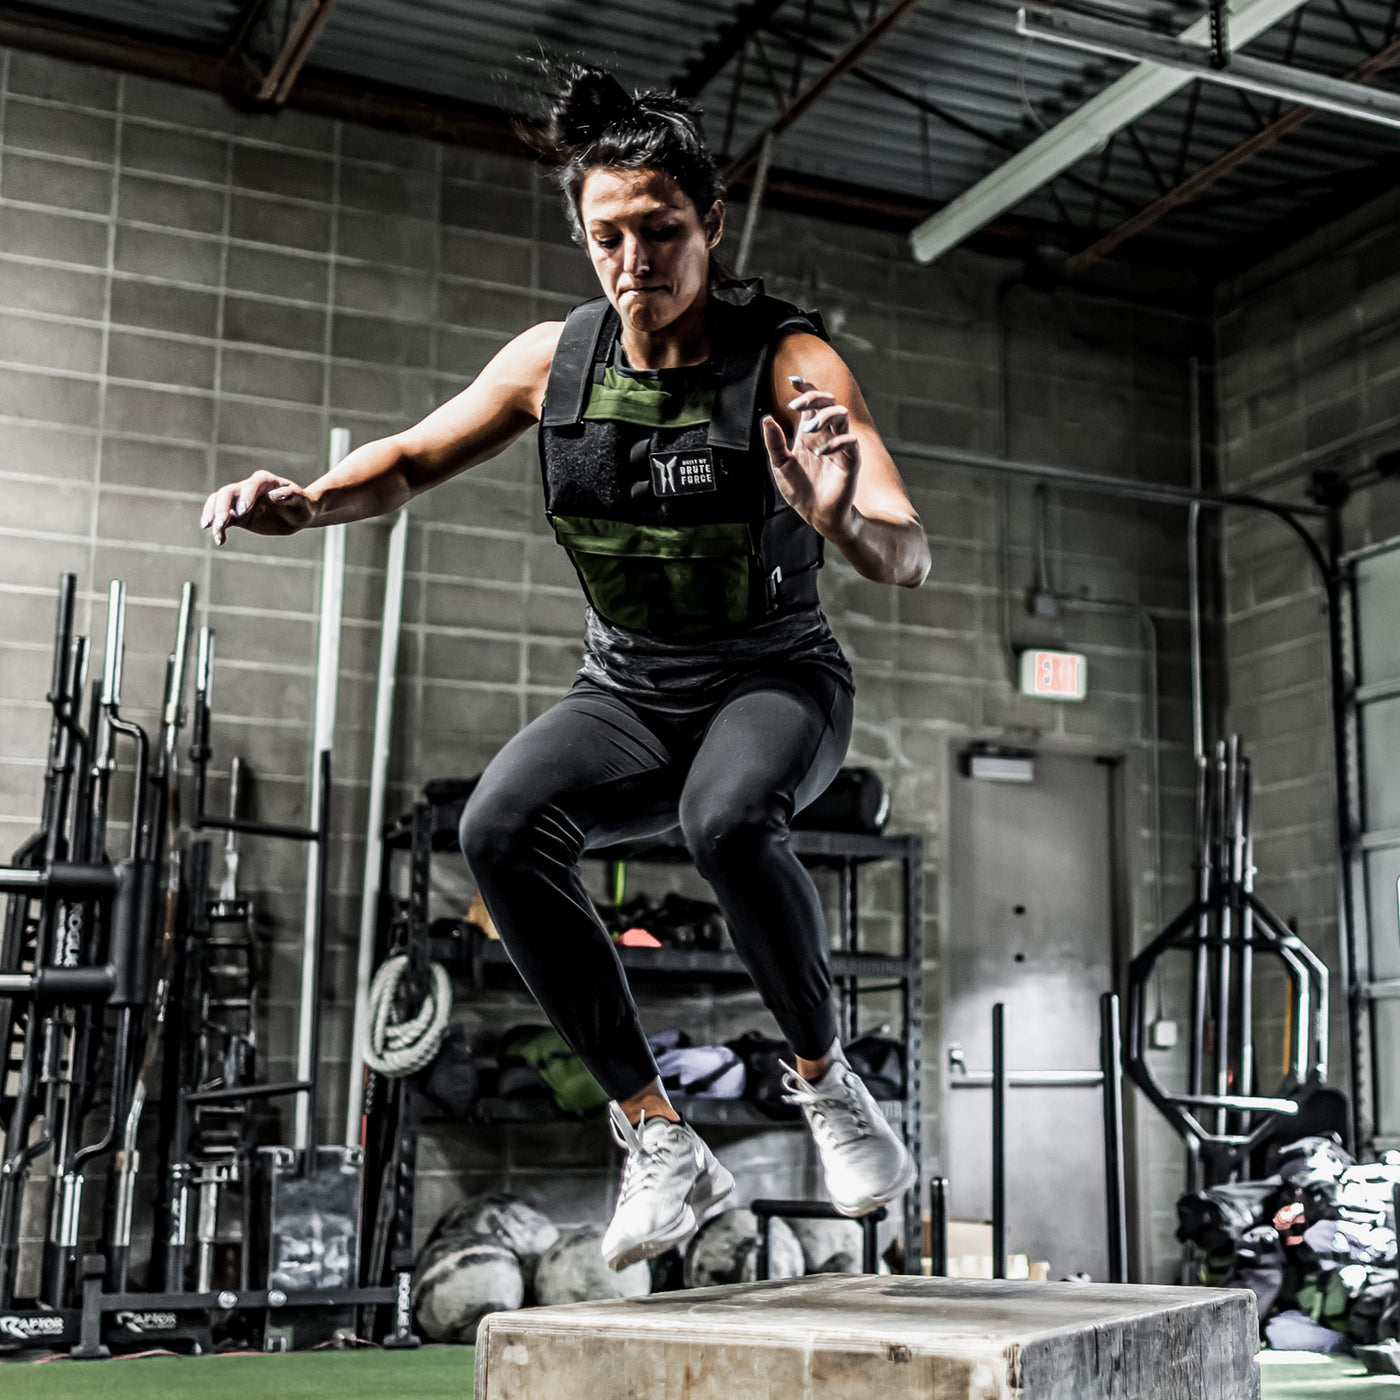 Brute Force Weighted Vest Box Jump